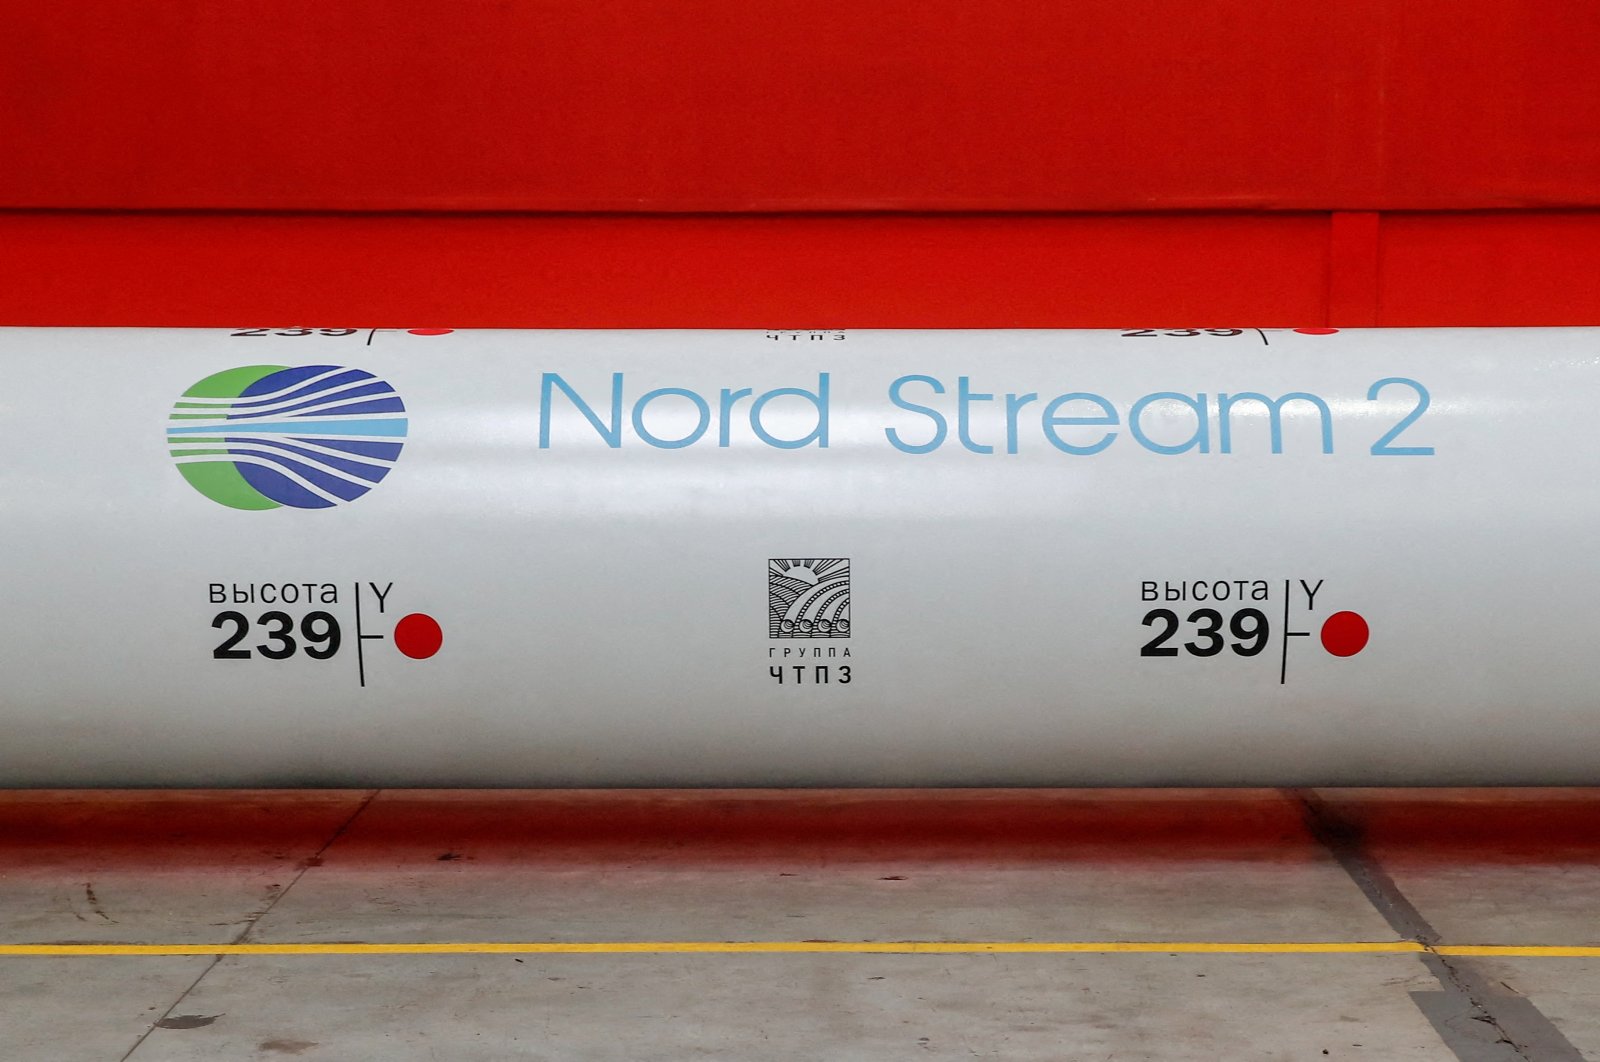 The logo of the Nord Stream 2 gas pipeline project is seen on a large-diameter pipe at the Chelyabinsk Pipe Rolling Plant owned by ChelPipe Group in Chelyabinsk, Russia, Feb. 26, 2020. (Reuters Photo)